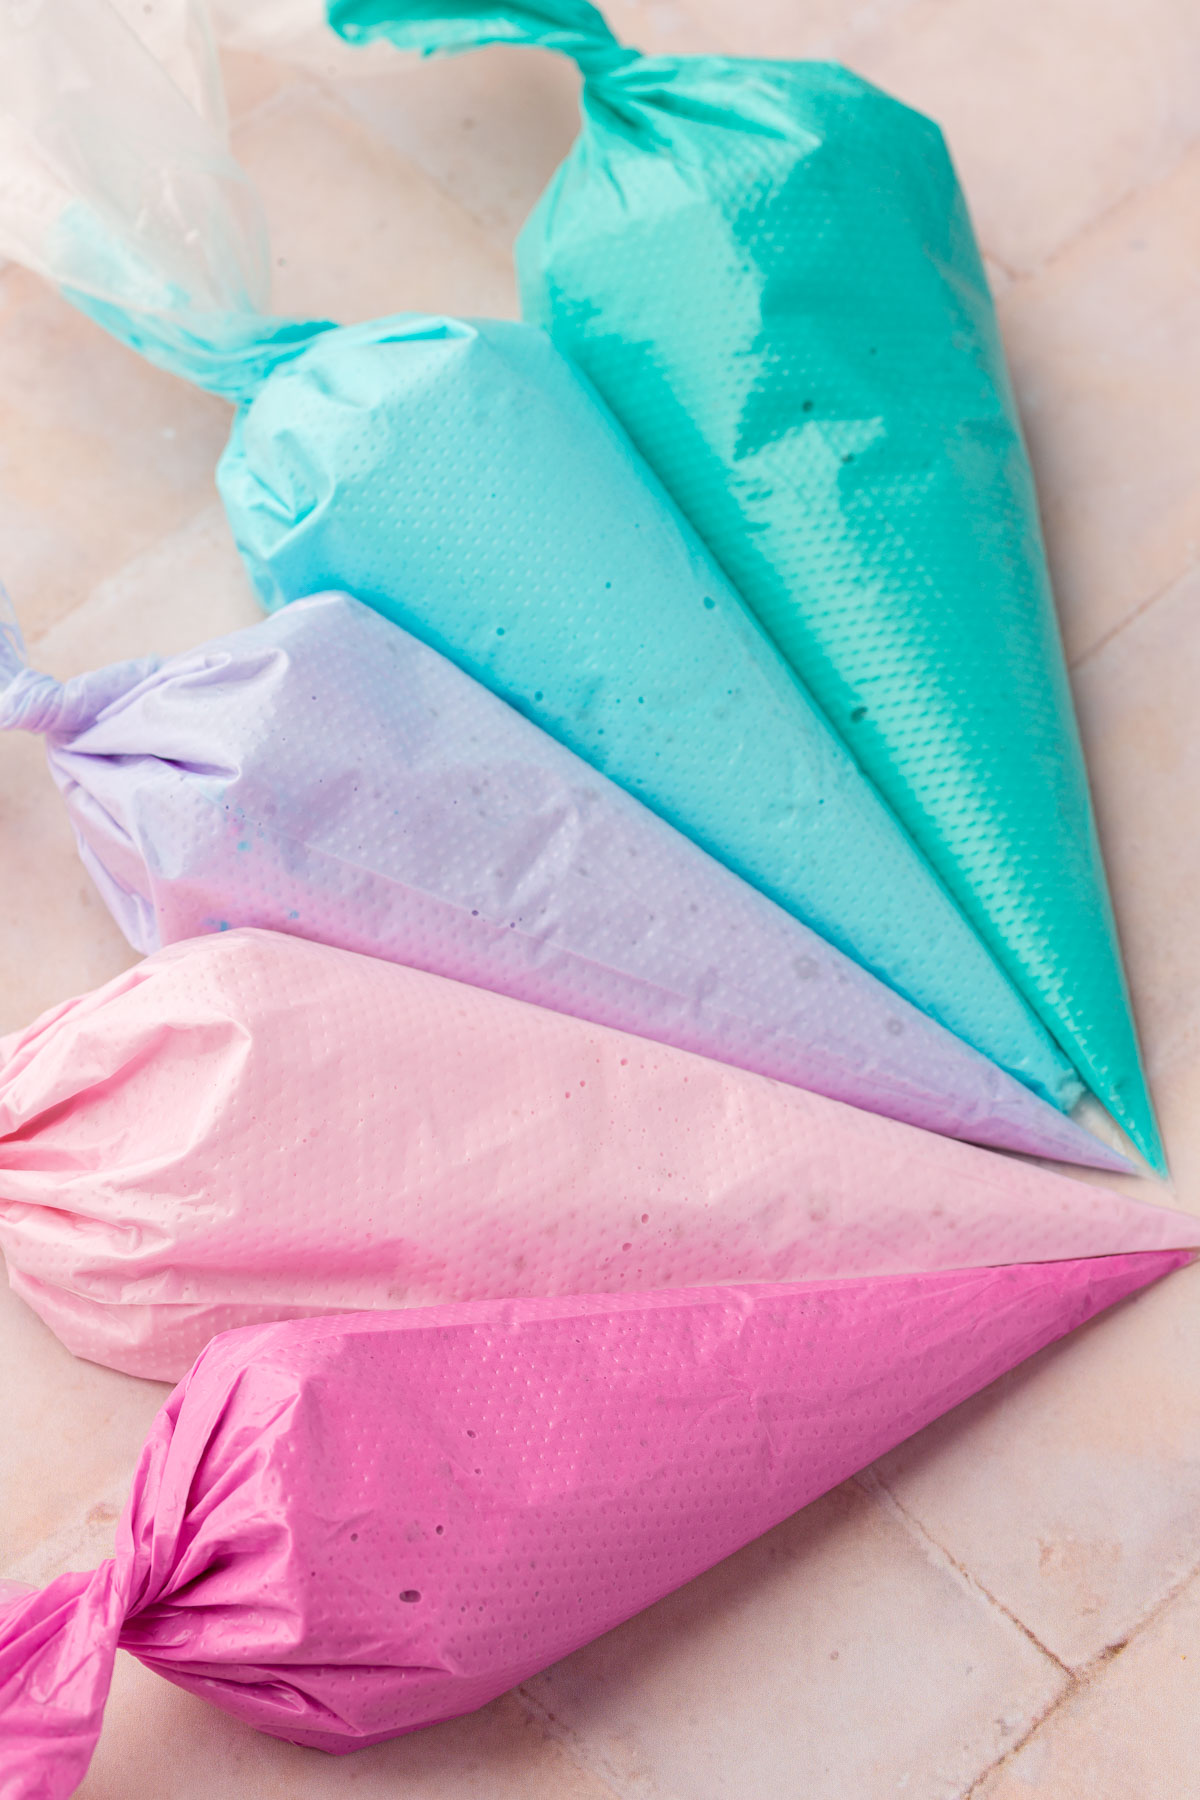 Five disposable pastry bags filled each with a different color of royal icing, teal, blue, purple, light pink and fuchsia.